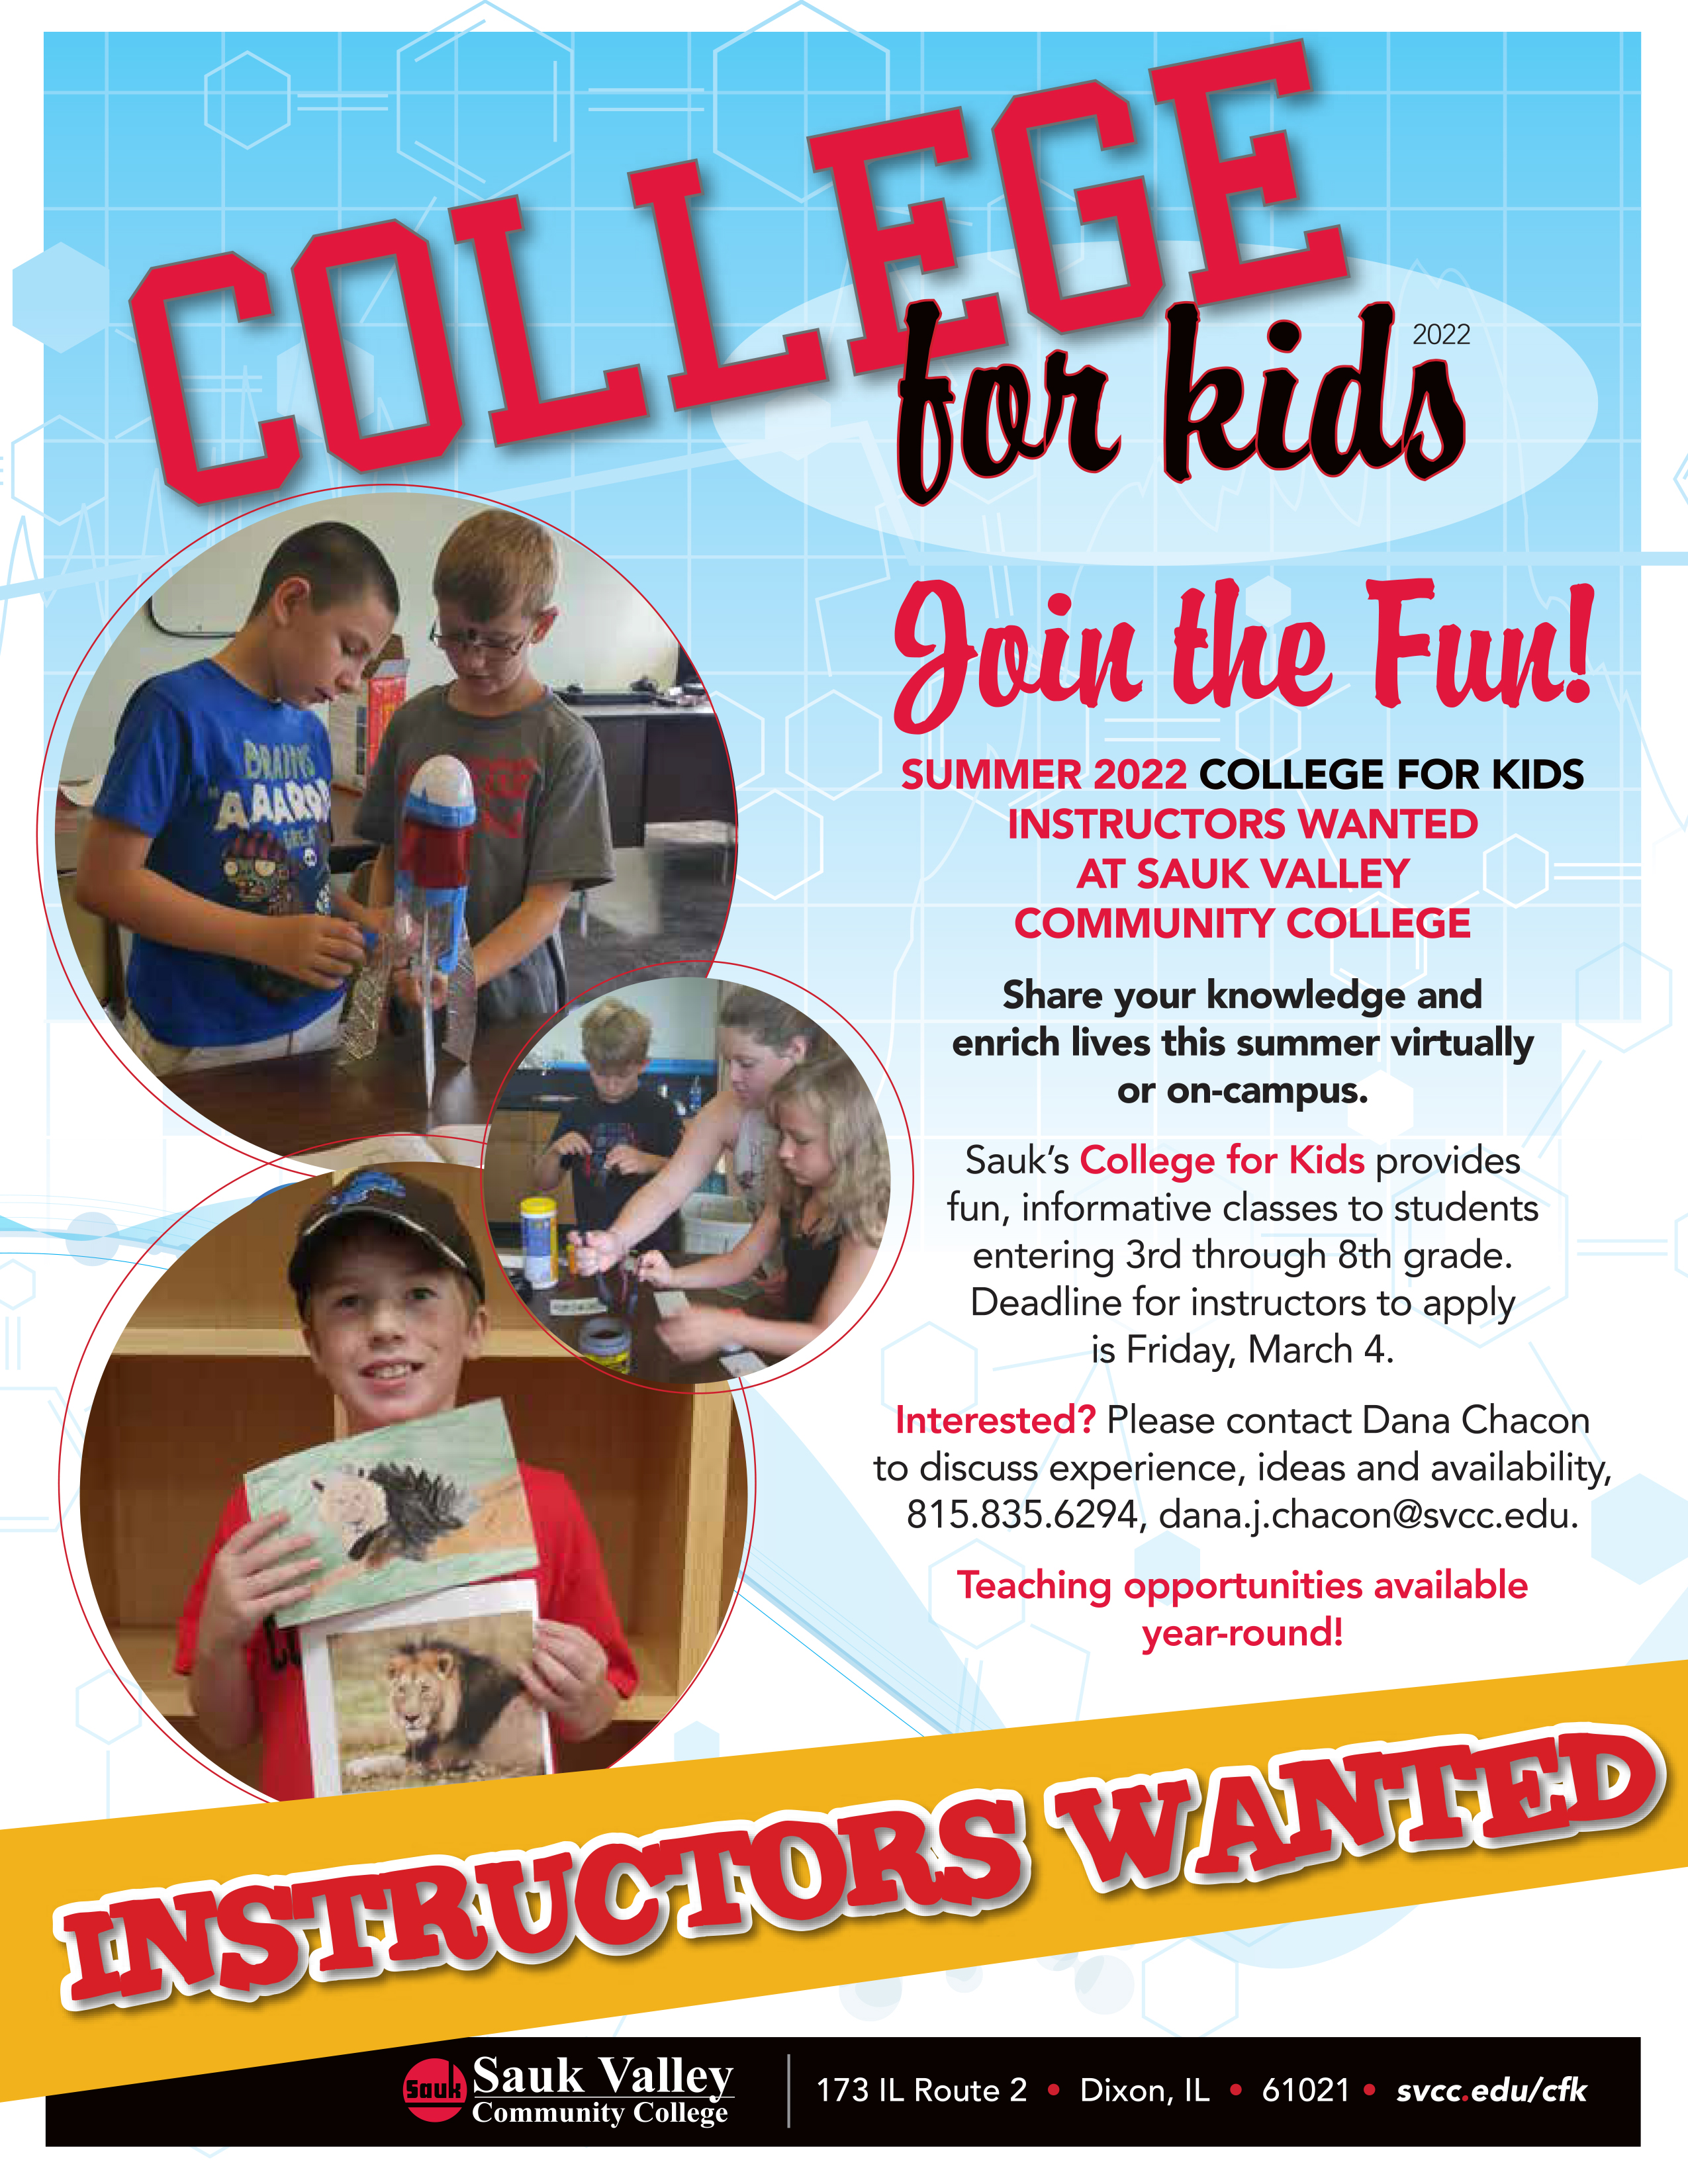 College For Kids 2022 Instructors Needed